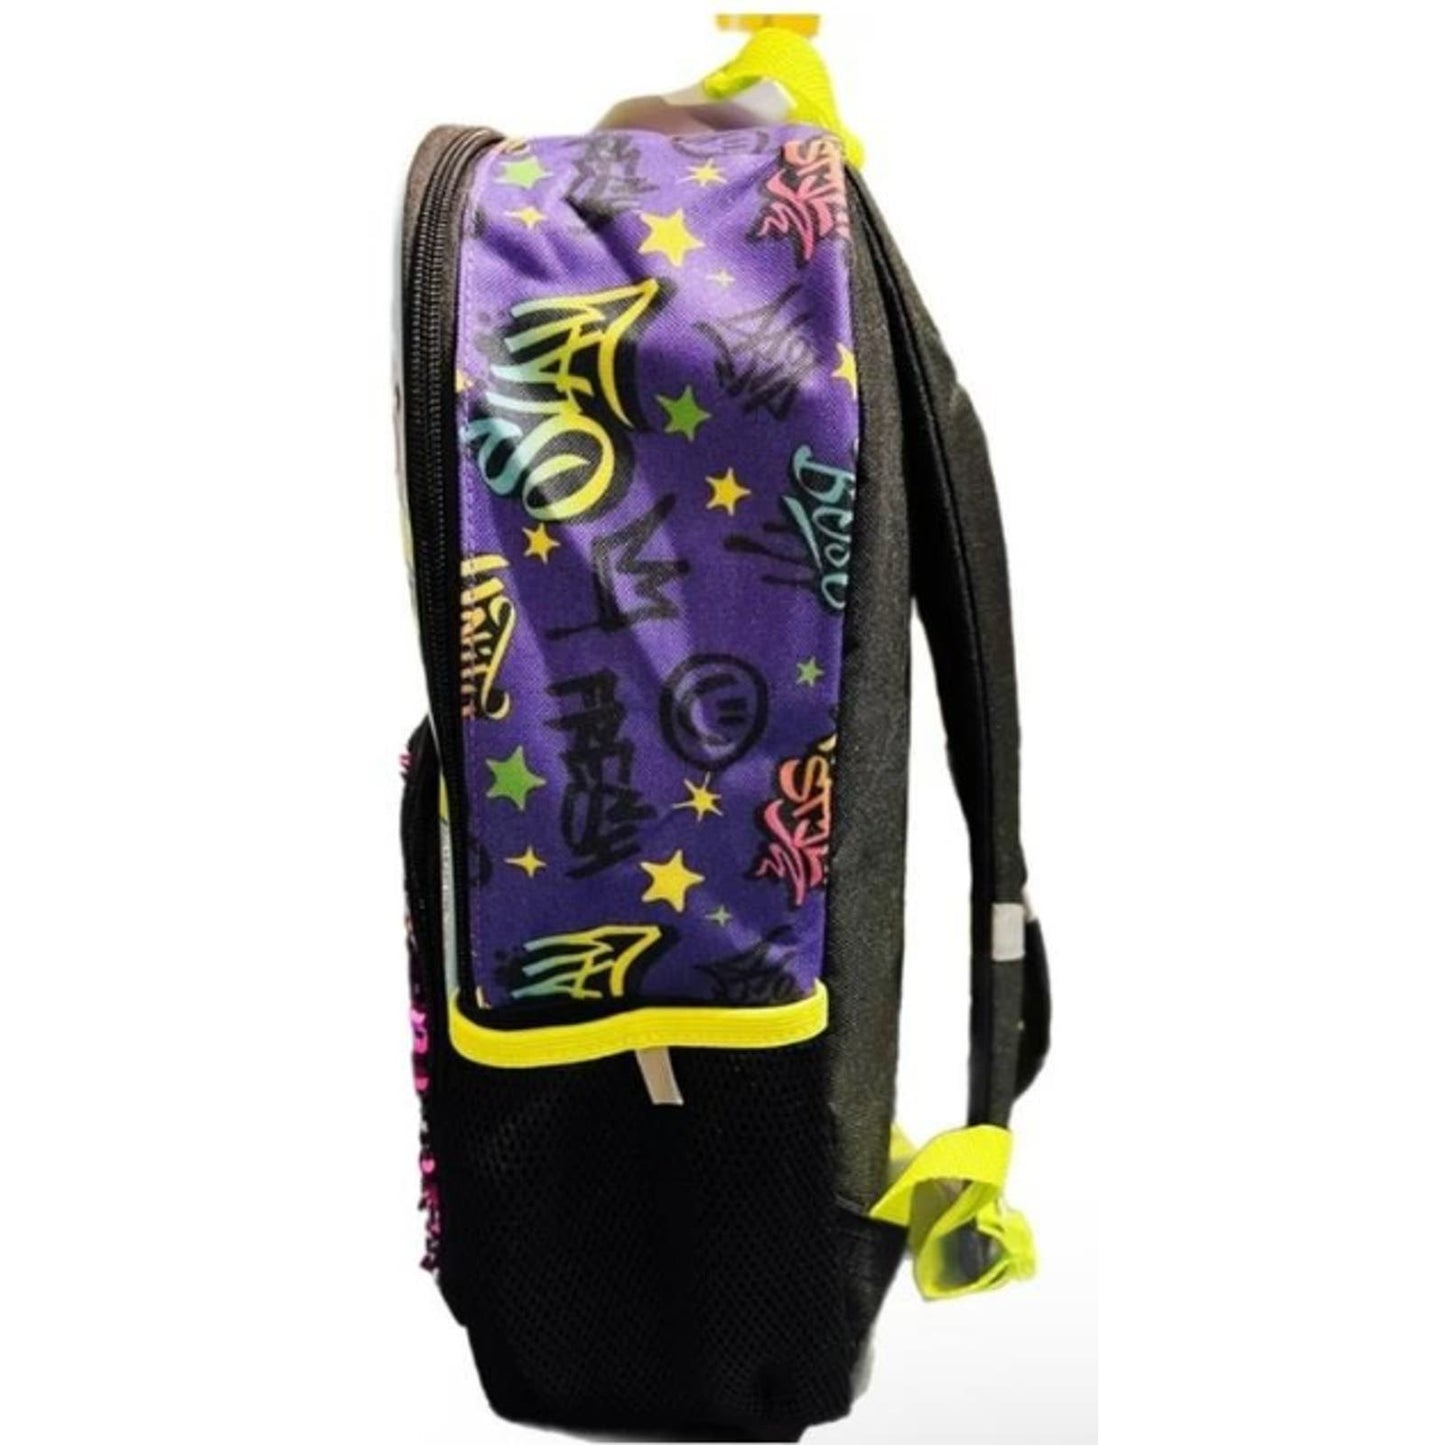 That Girl Lay Lay Girls Backpack, Multicolor